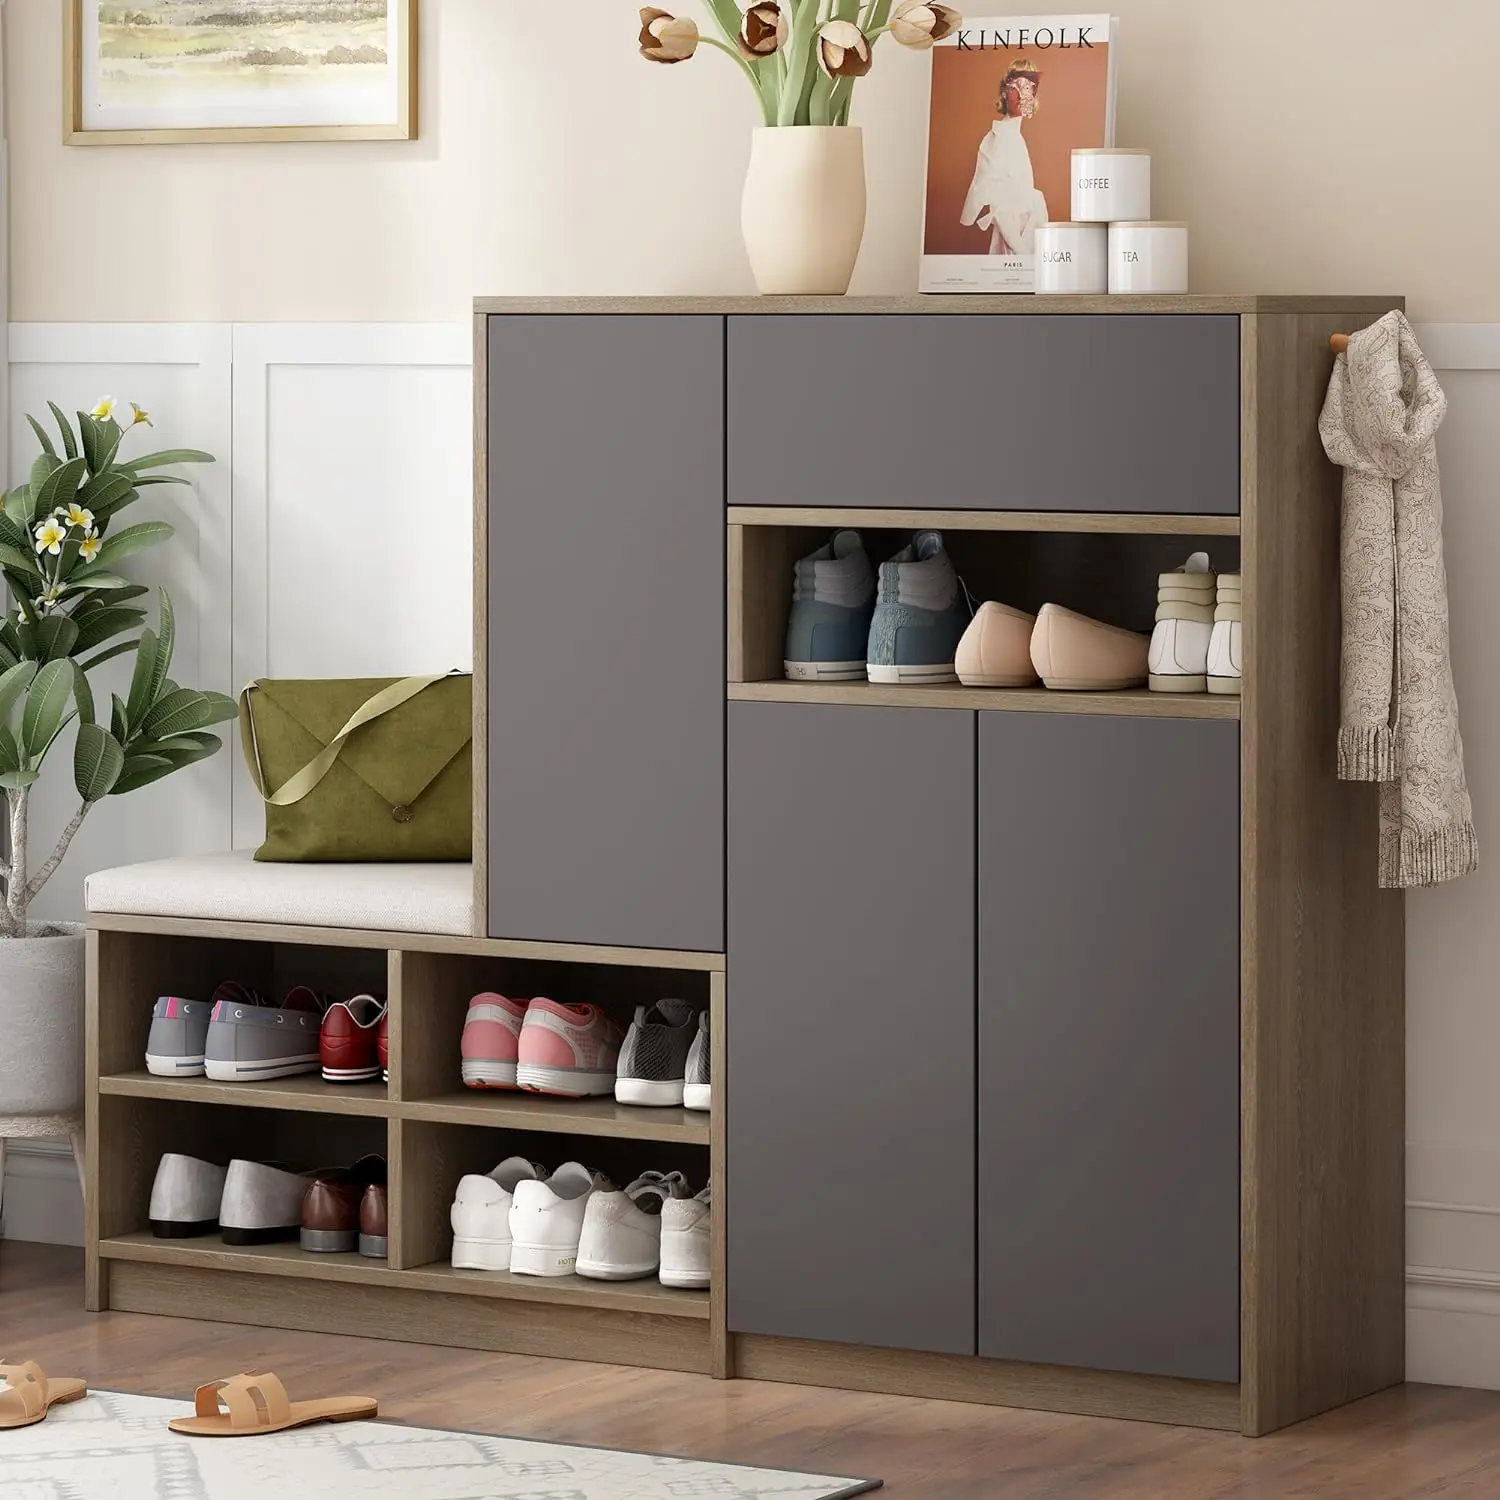 

Multi-Functional Rack with Padded Seat and Adjustable Shelves, 2-in-1 Shoe Storage Bench & Cabinets, Grey